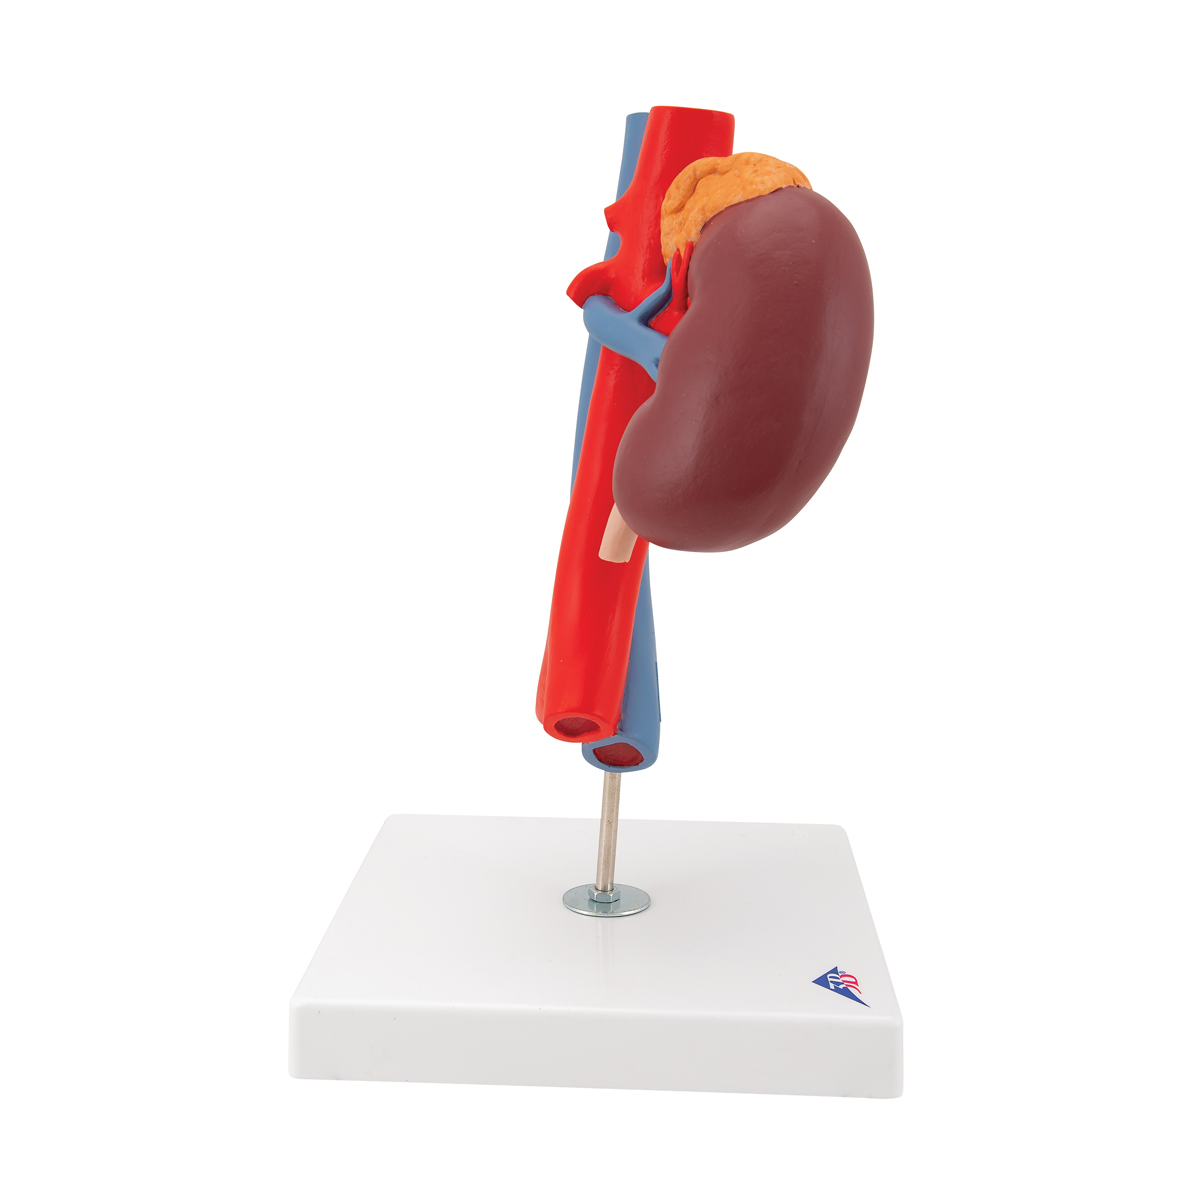 Anatomical Teaching Model - Plastic Anatomy Models - Renal System Models -  Kidneys with Vessels